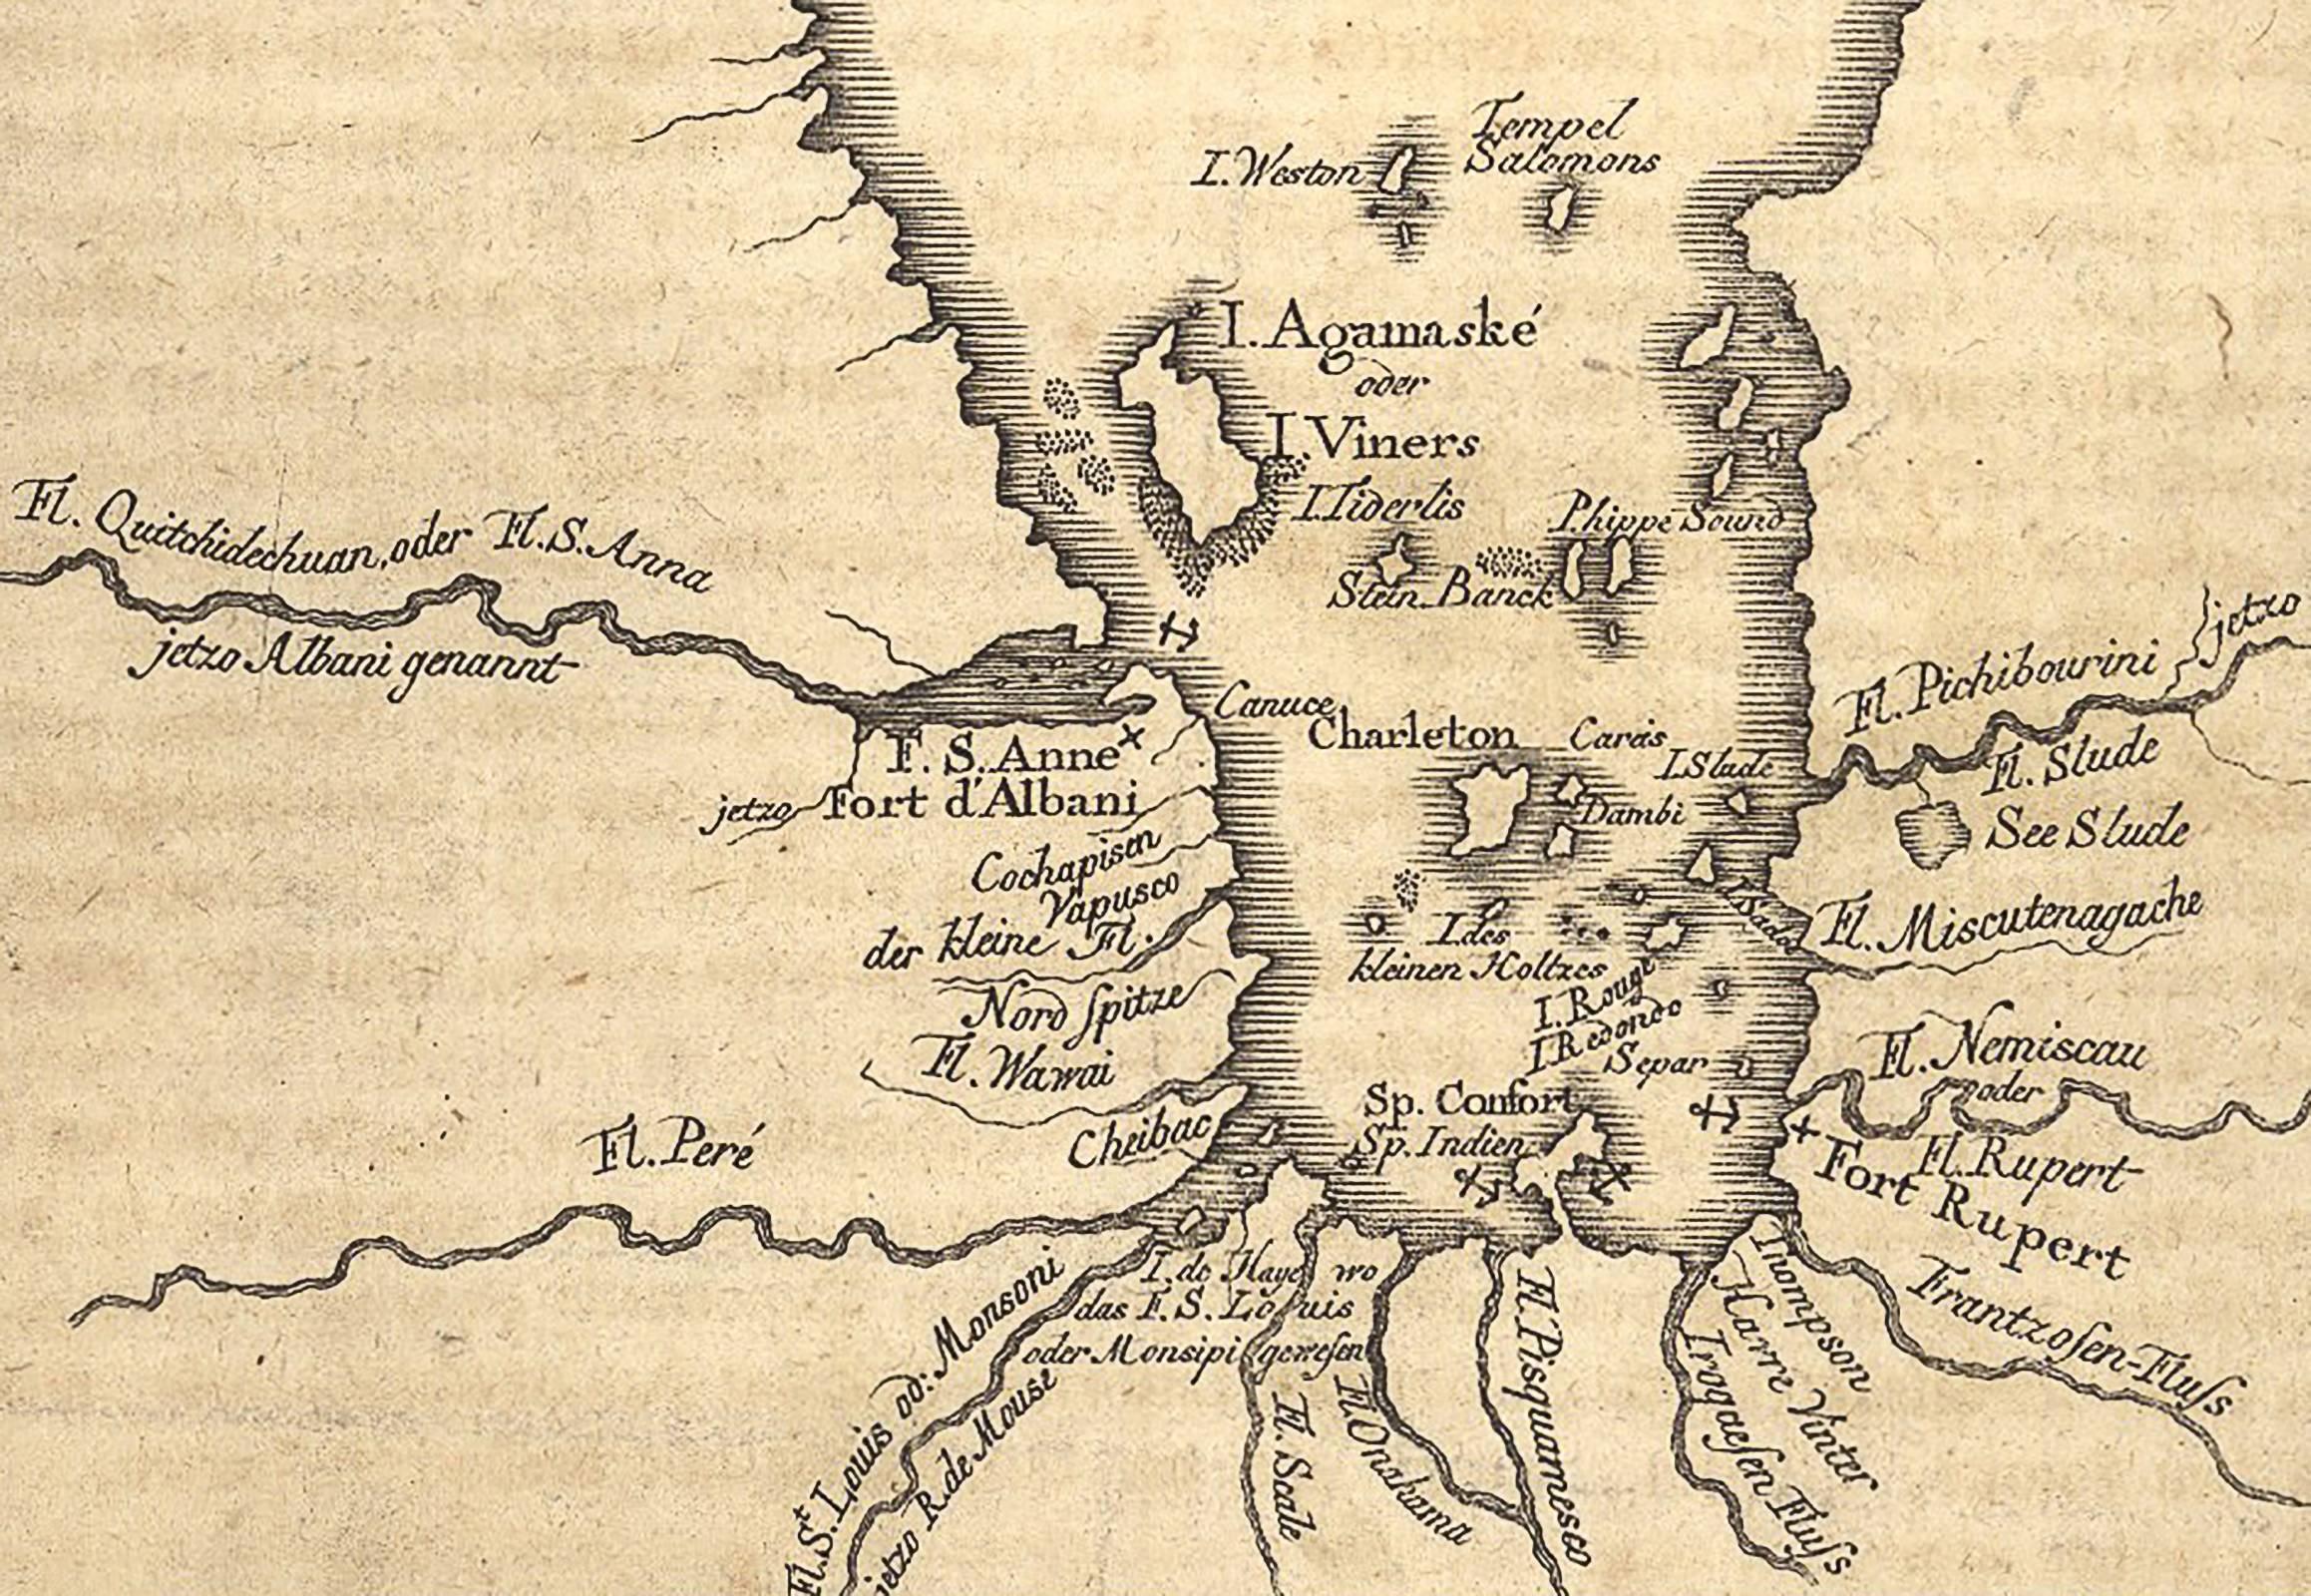 1774 Map of Lower Hudson Bay by  Nicolas Bellin - Print by Jacques-Nicolas Bellin